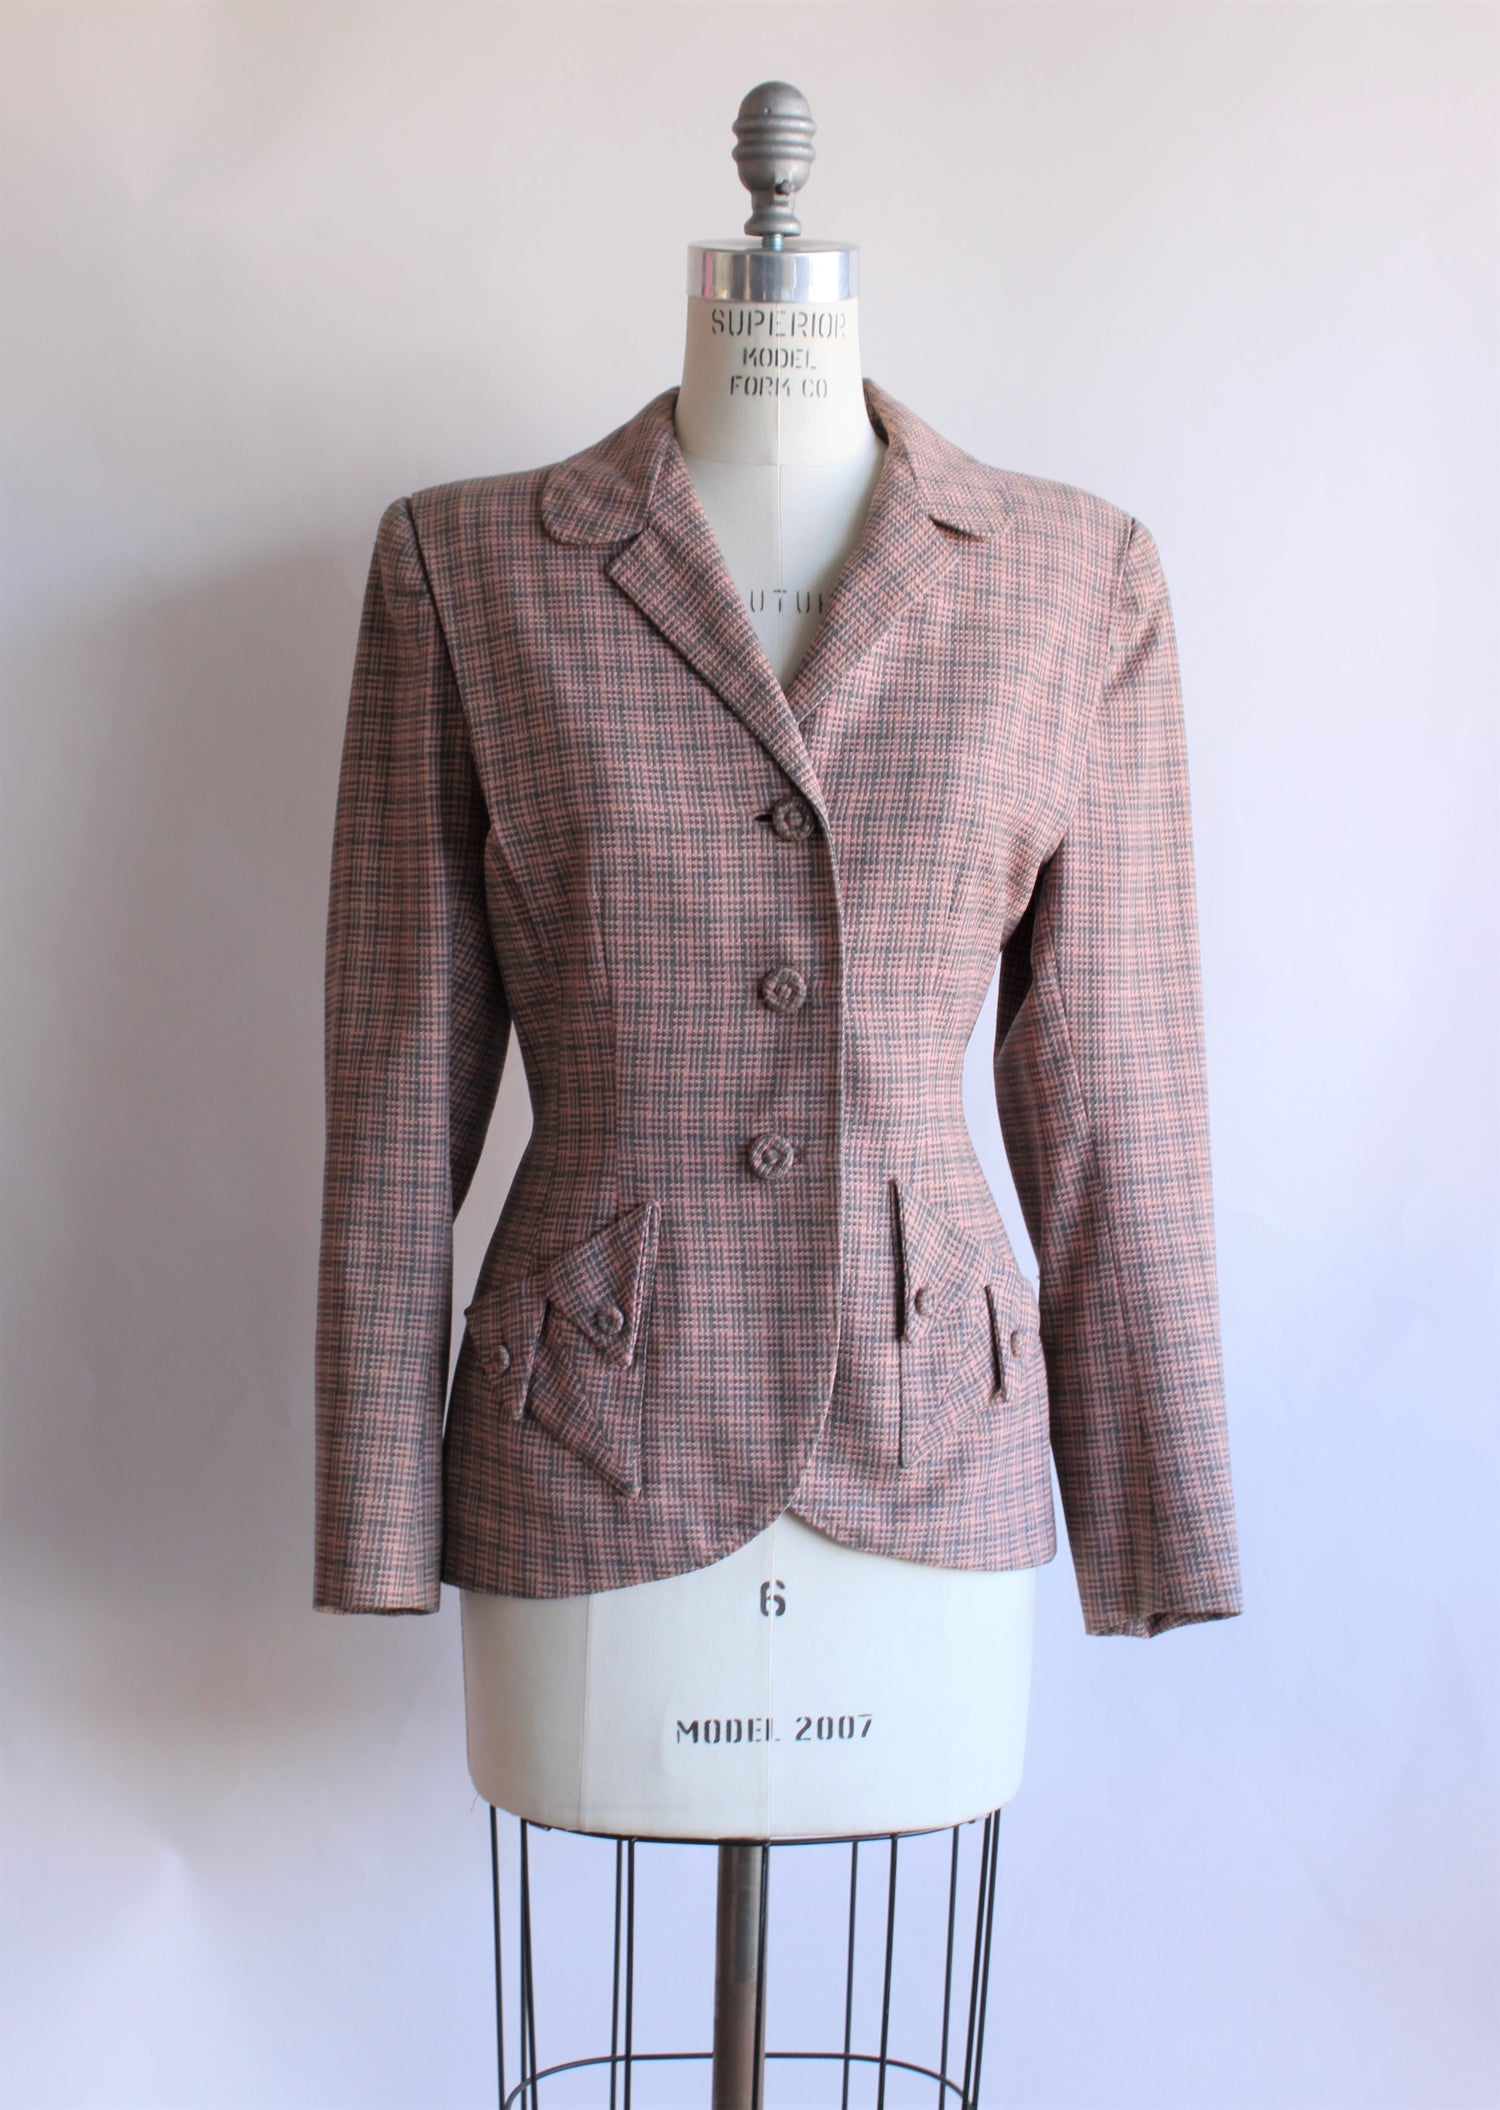 VIntage 1950s Gray and Pink Jacket With Pink Lining By Friedmont